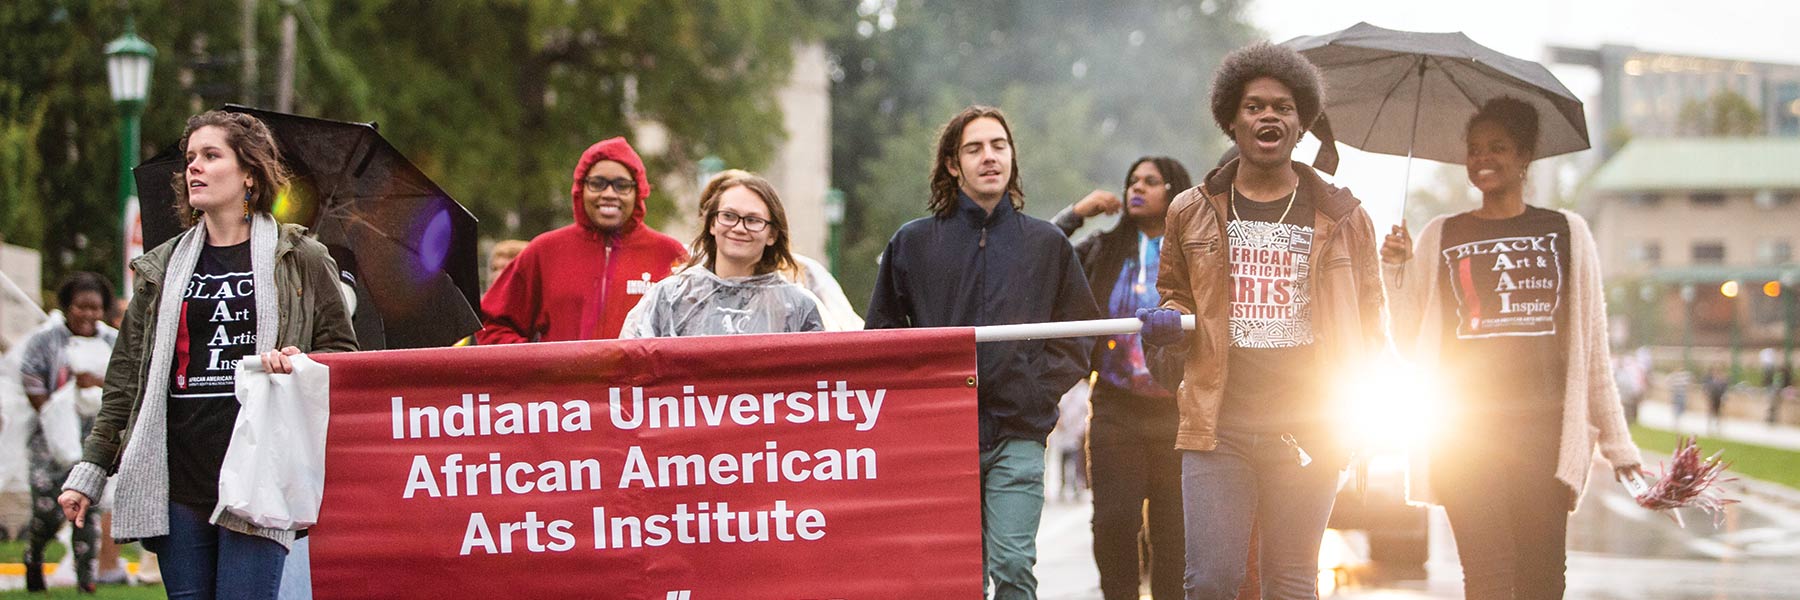 students in a parade holding a banner for the Indiana University African American arts institute